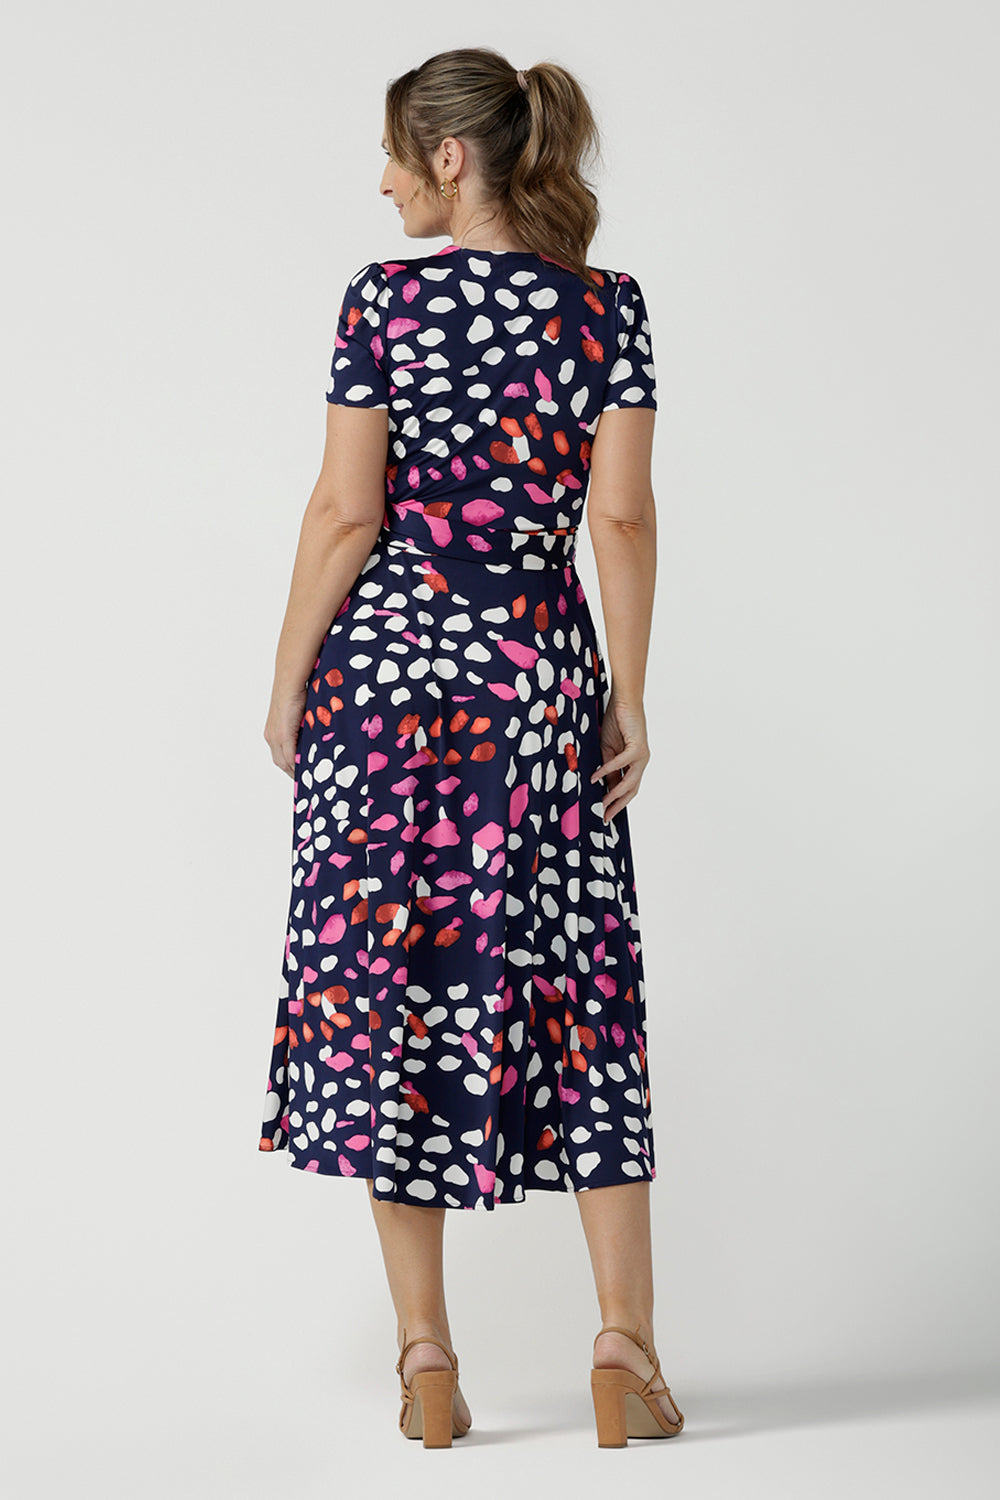 Back view of an over 40, size 10 woman wearing a abstract jersey print, wrap dress with short sleeves. A great dress for summer casual wear, or for travel. Shop made in Australia dresses in petite to plus sizes online at Australian fashion brand, Leina & Fleur.